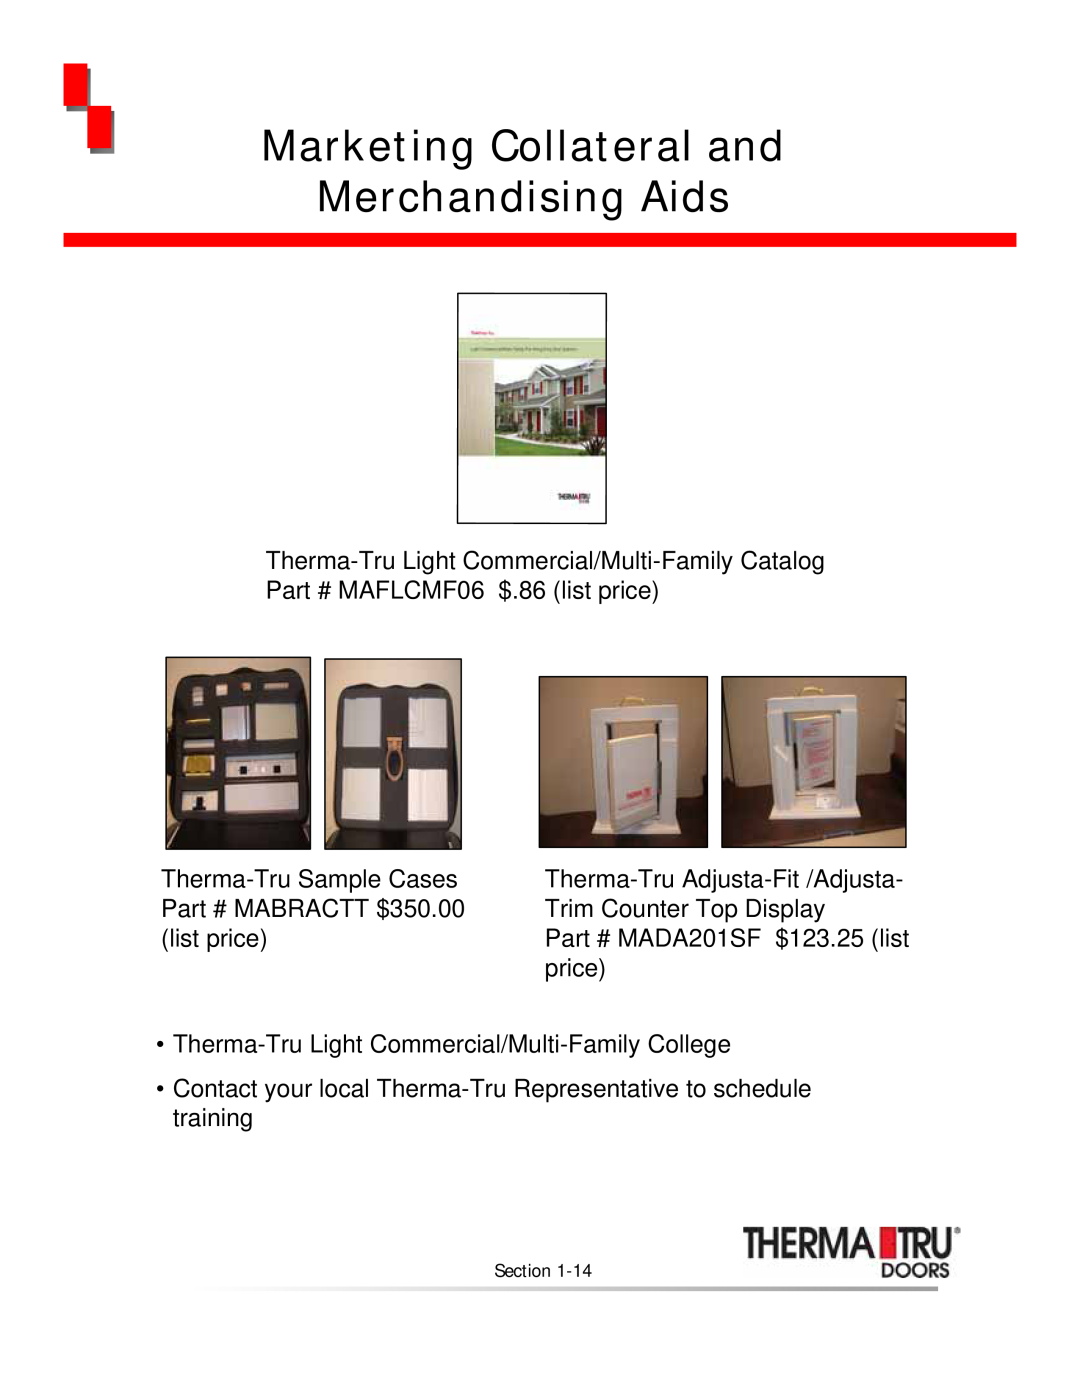 Therma-Tru none manual Marketing Collateral and Merchandising Aids 